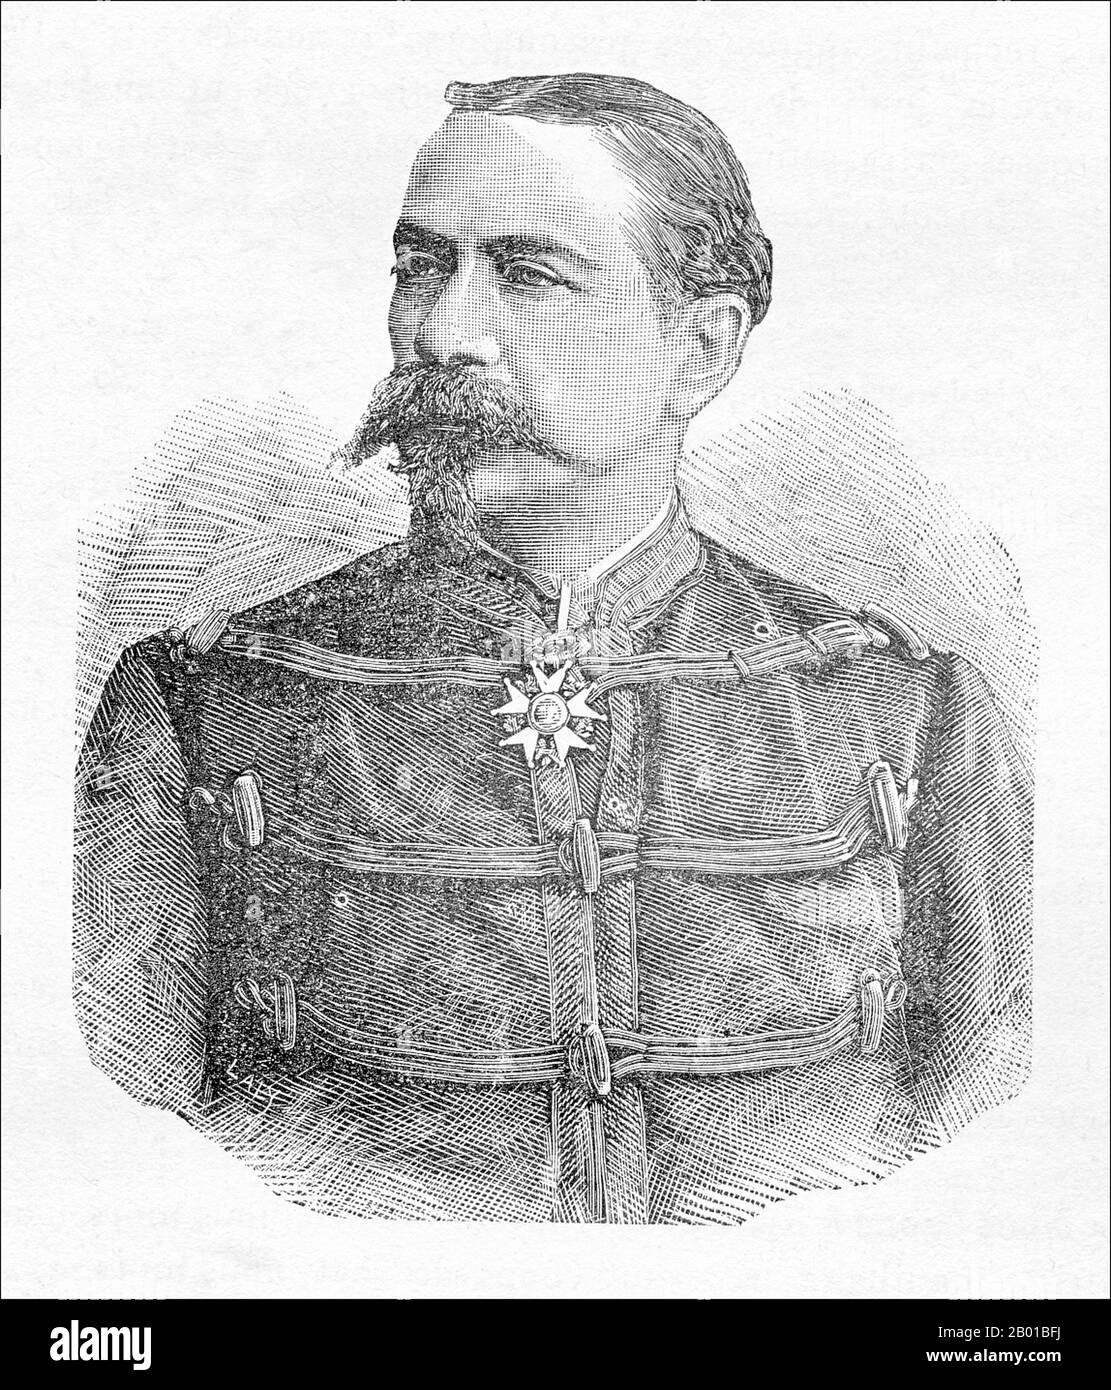 Vietnam/France: General Philippe-Marie-Henri Roussel de Courcy (30 May 1827 - 8 November 1887), commander of the Tonkin Expeditionary Corps (r. 1885-1886). Engraving, 1886.  The Tonkin Campaign (French: Campagne du Tonkin) was an armed conflict fought between June 1883 and April 1886 by the French against, variously, the Vietnamese, Liu Yongfu's Black Flag Army and the Chinese Guangxi and Yunnan armies to occupy Tonkin (northern Vietnam) and entrench a French protectorate there. Stock Photo